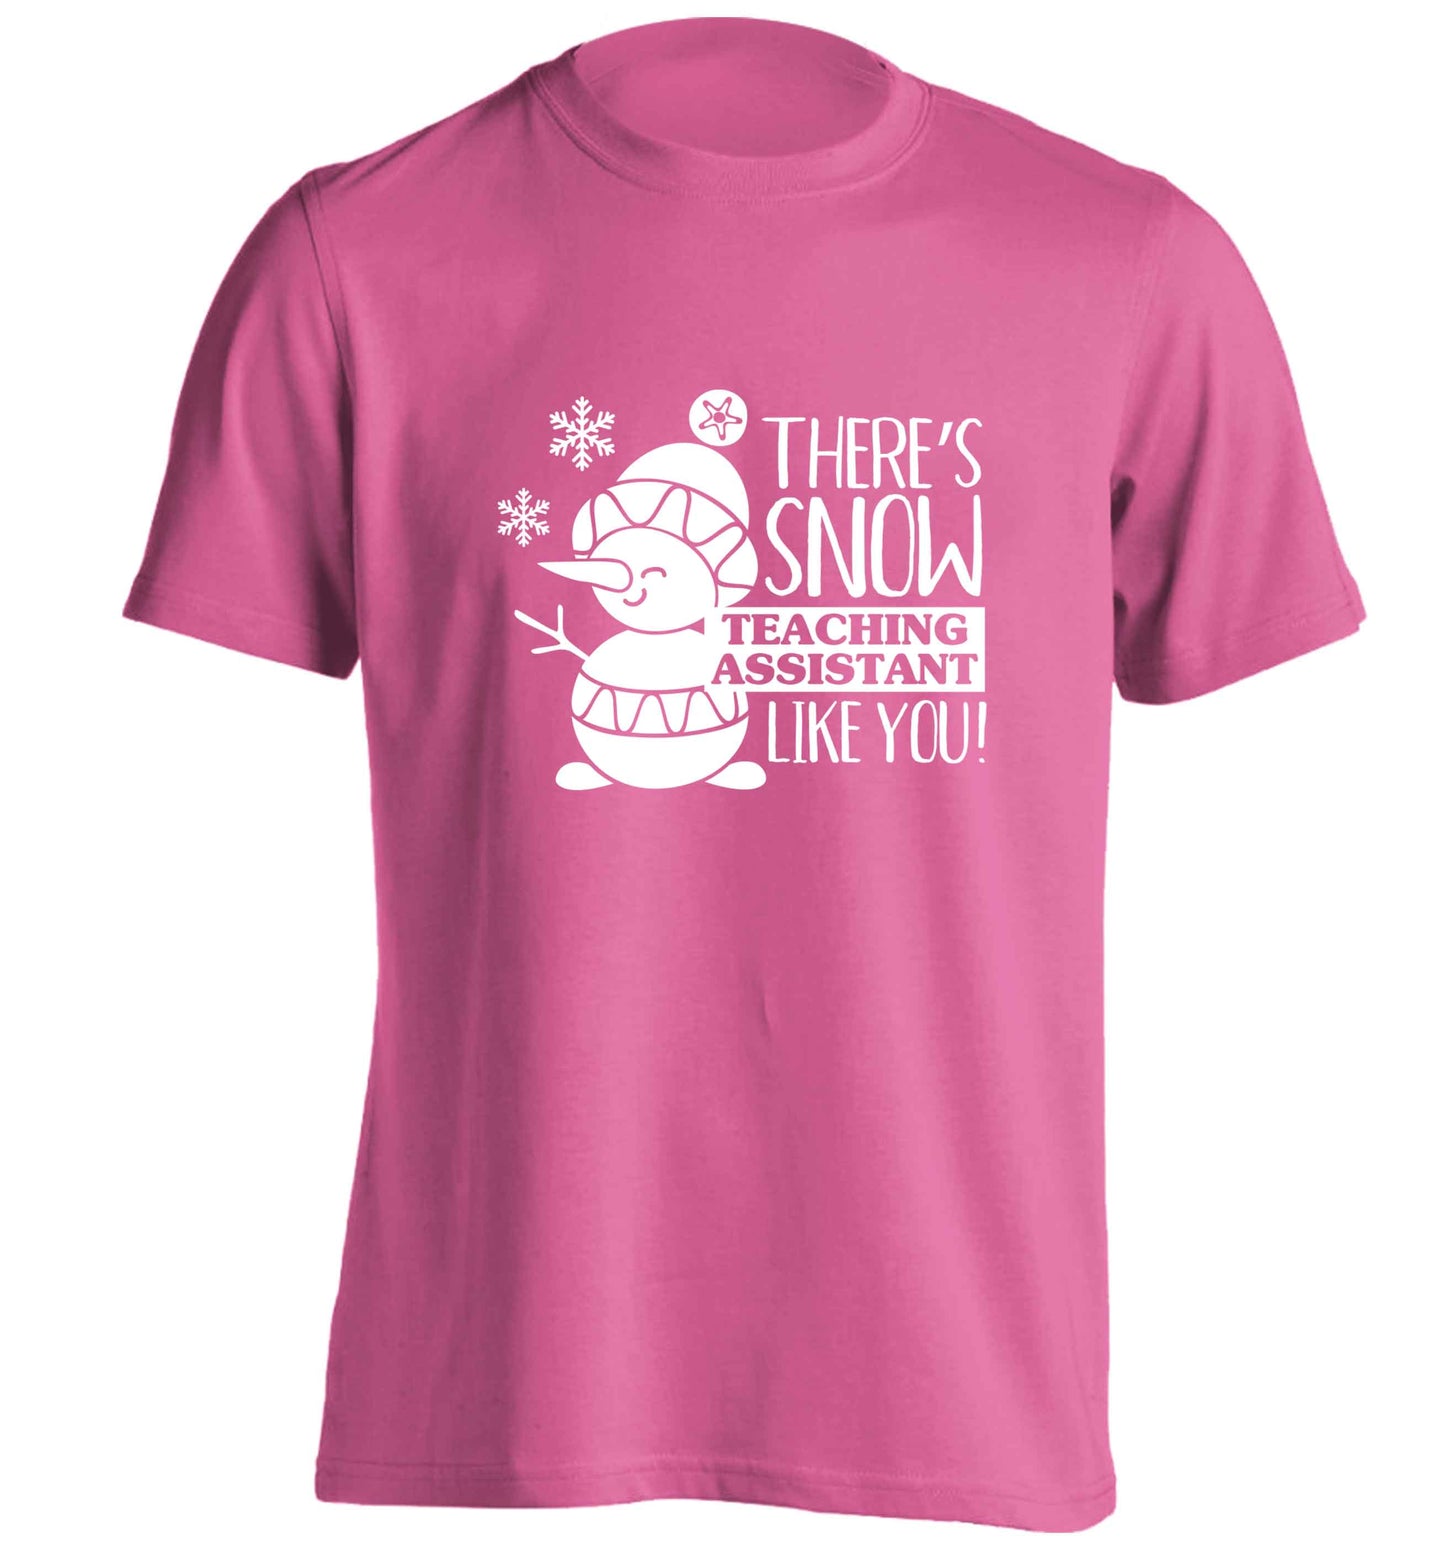 There's snow teaching assistant like you adults unisex pink Tshirt 2XL